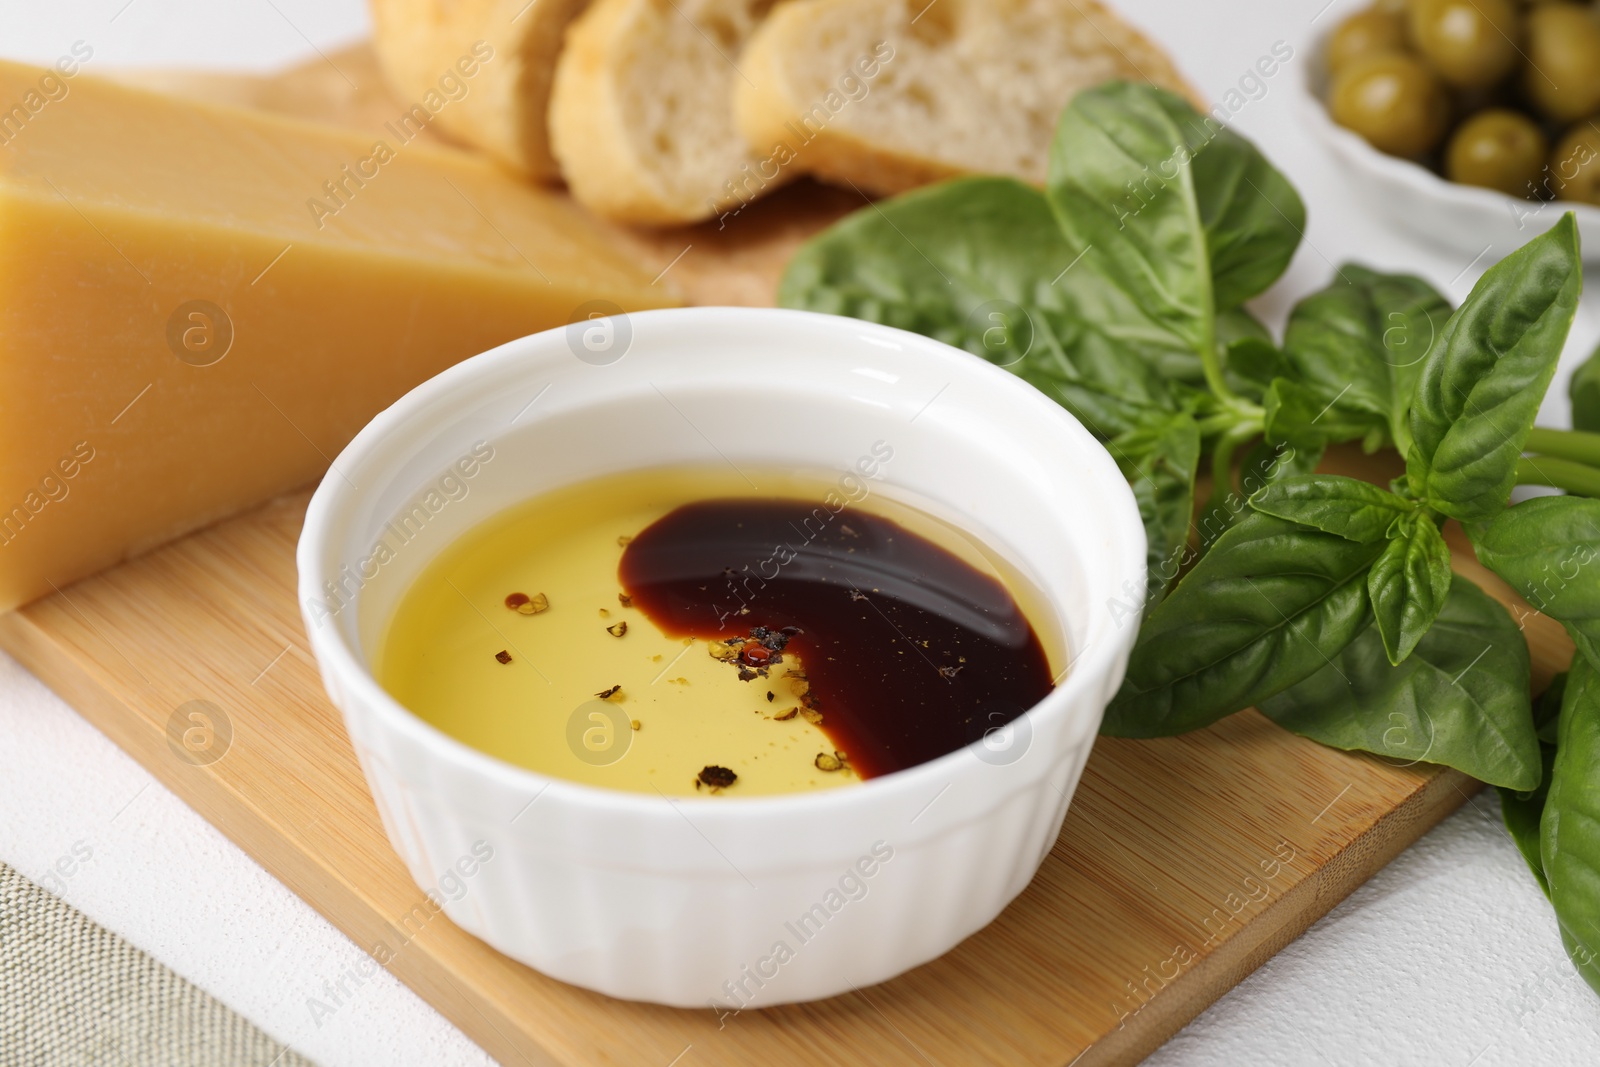 Photo of Bowl of organic balsamic vinegar with oil, basil and other products on table, closeup